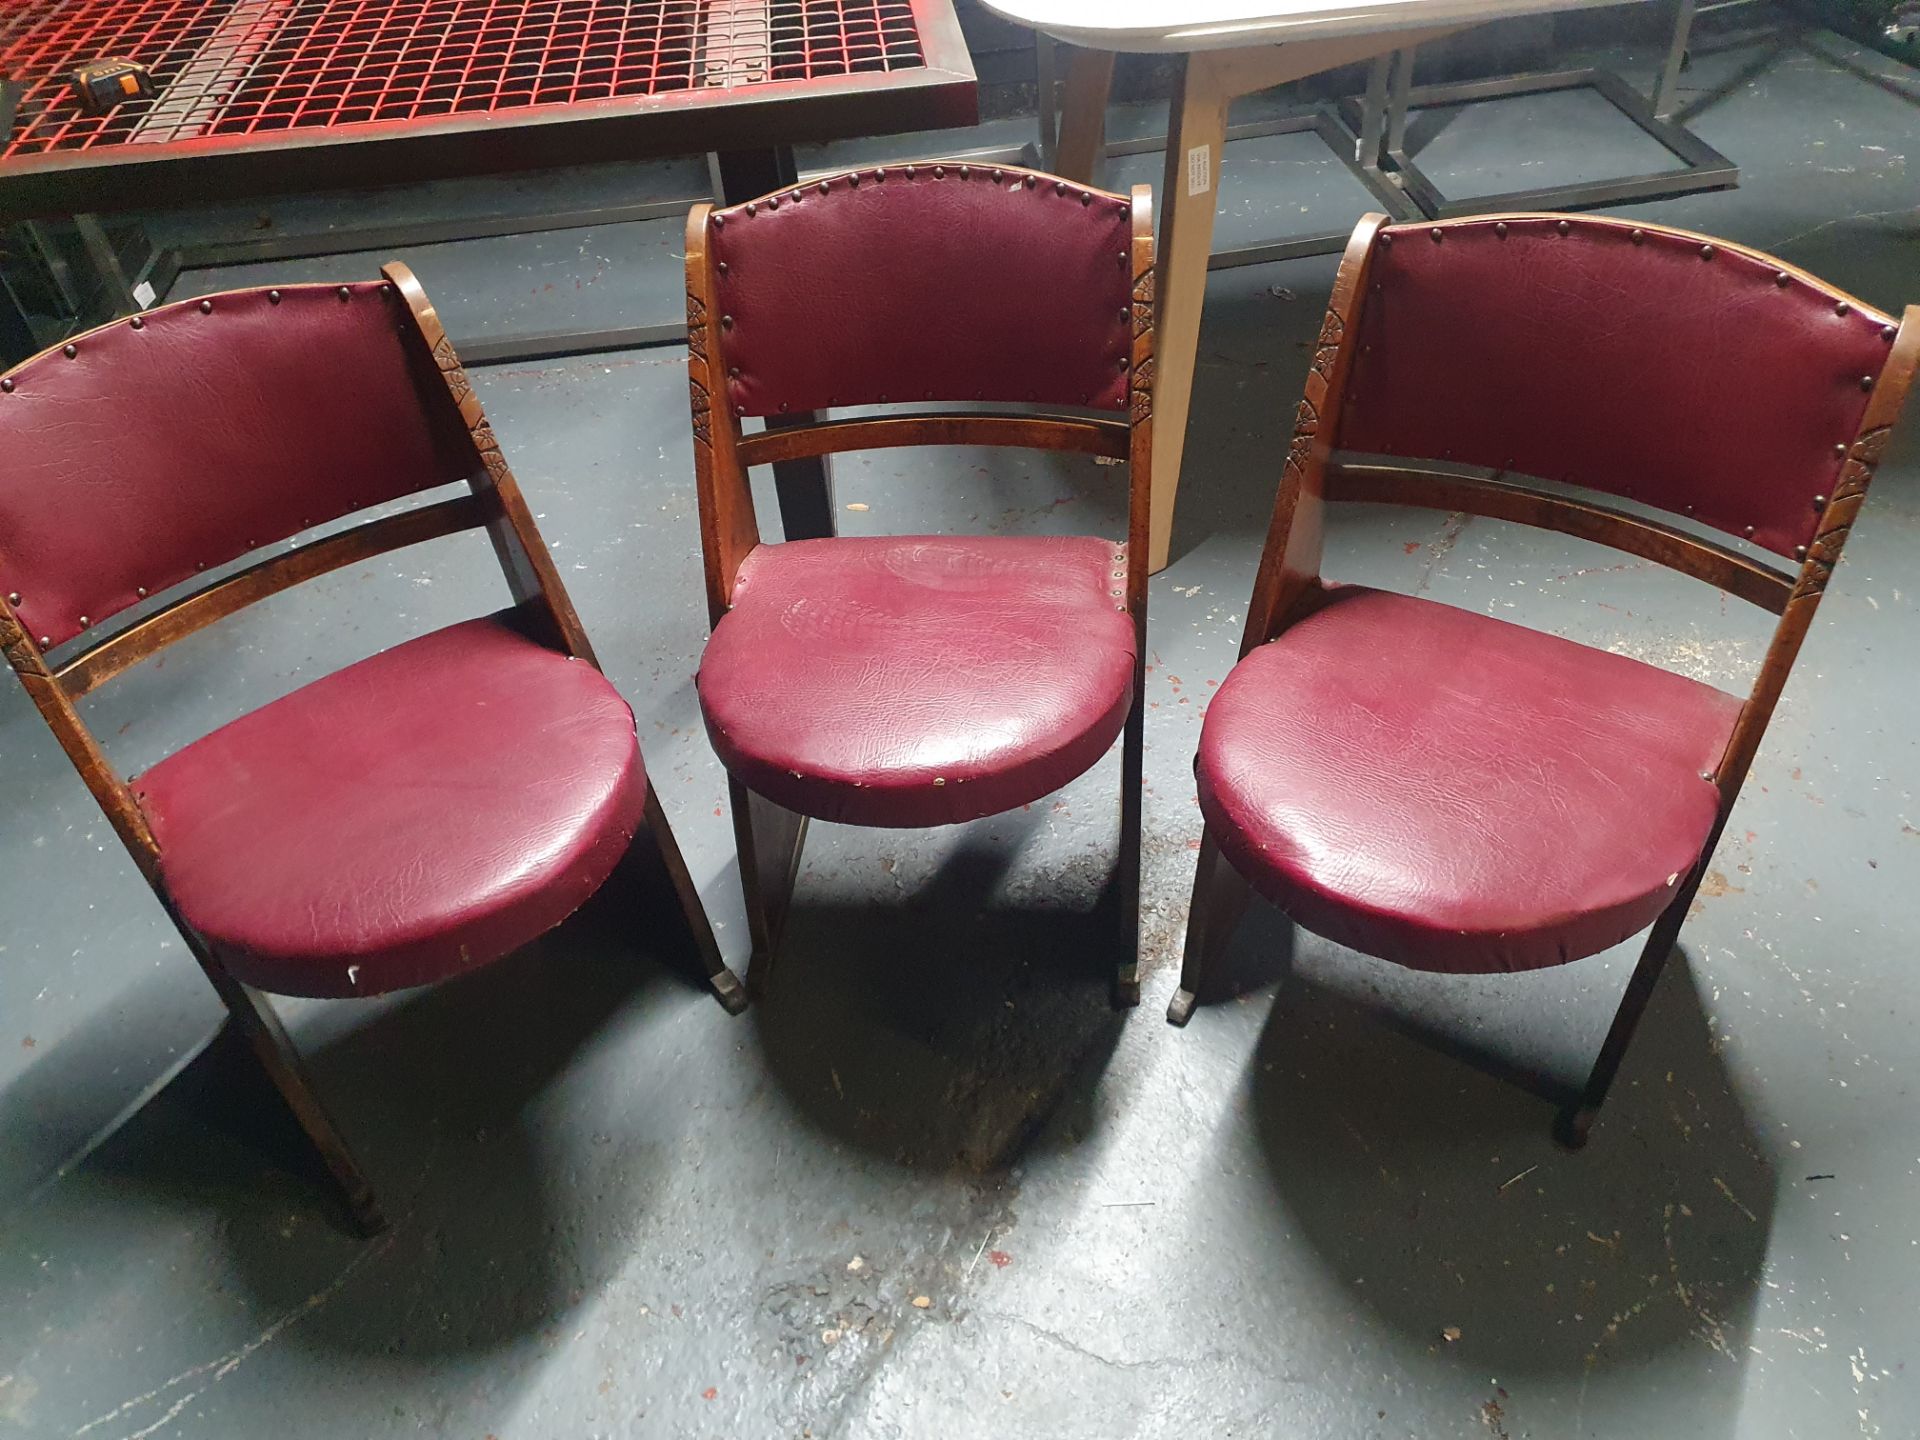 Carved Wooden Chairs With Leather Pads x3 - Image 2 of 4